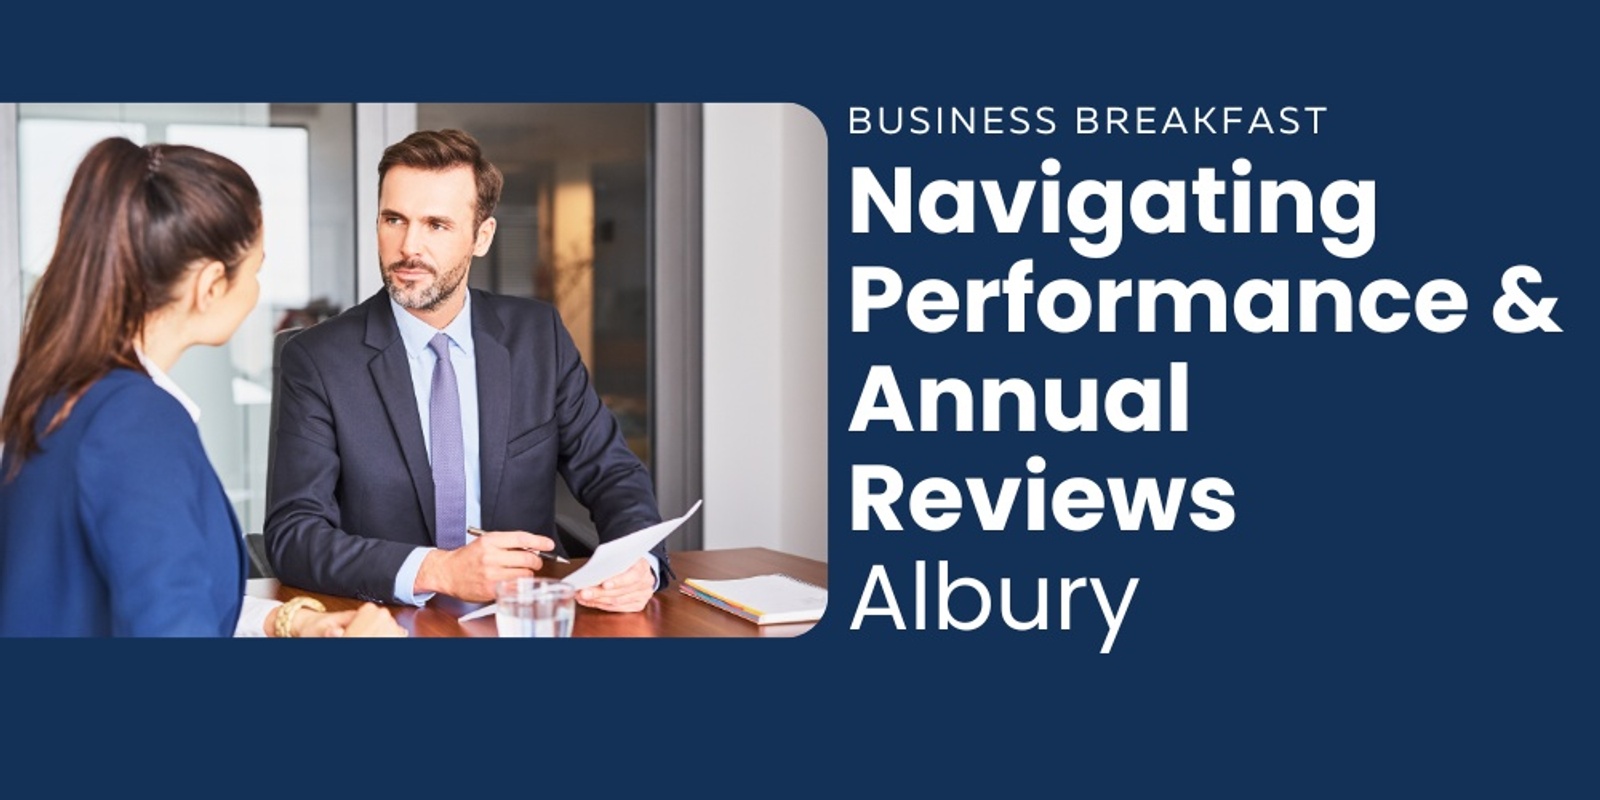 Business Breakfast: Navigating Performance and Annual Reviews ALBURY